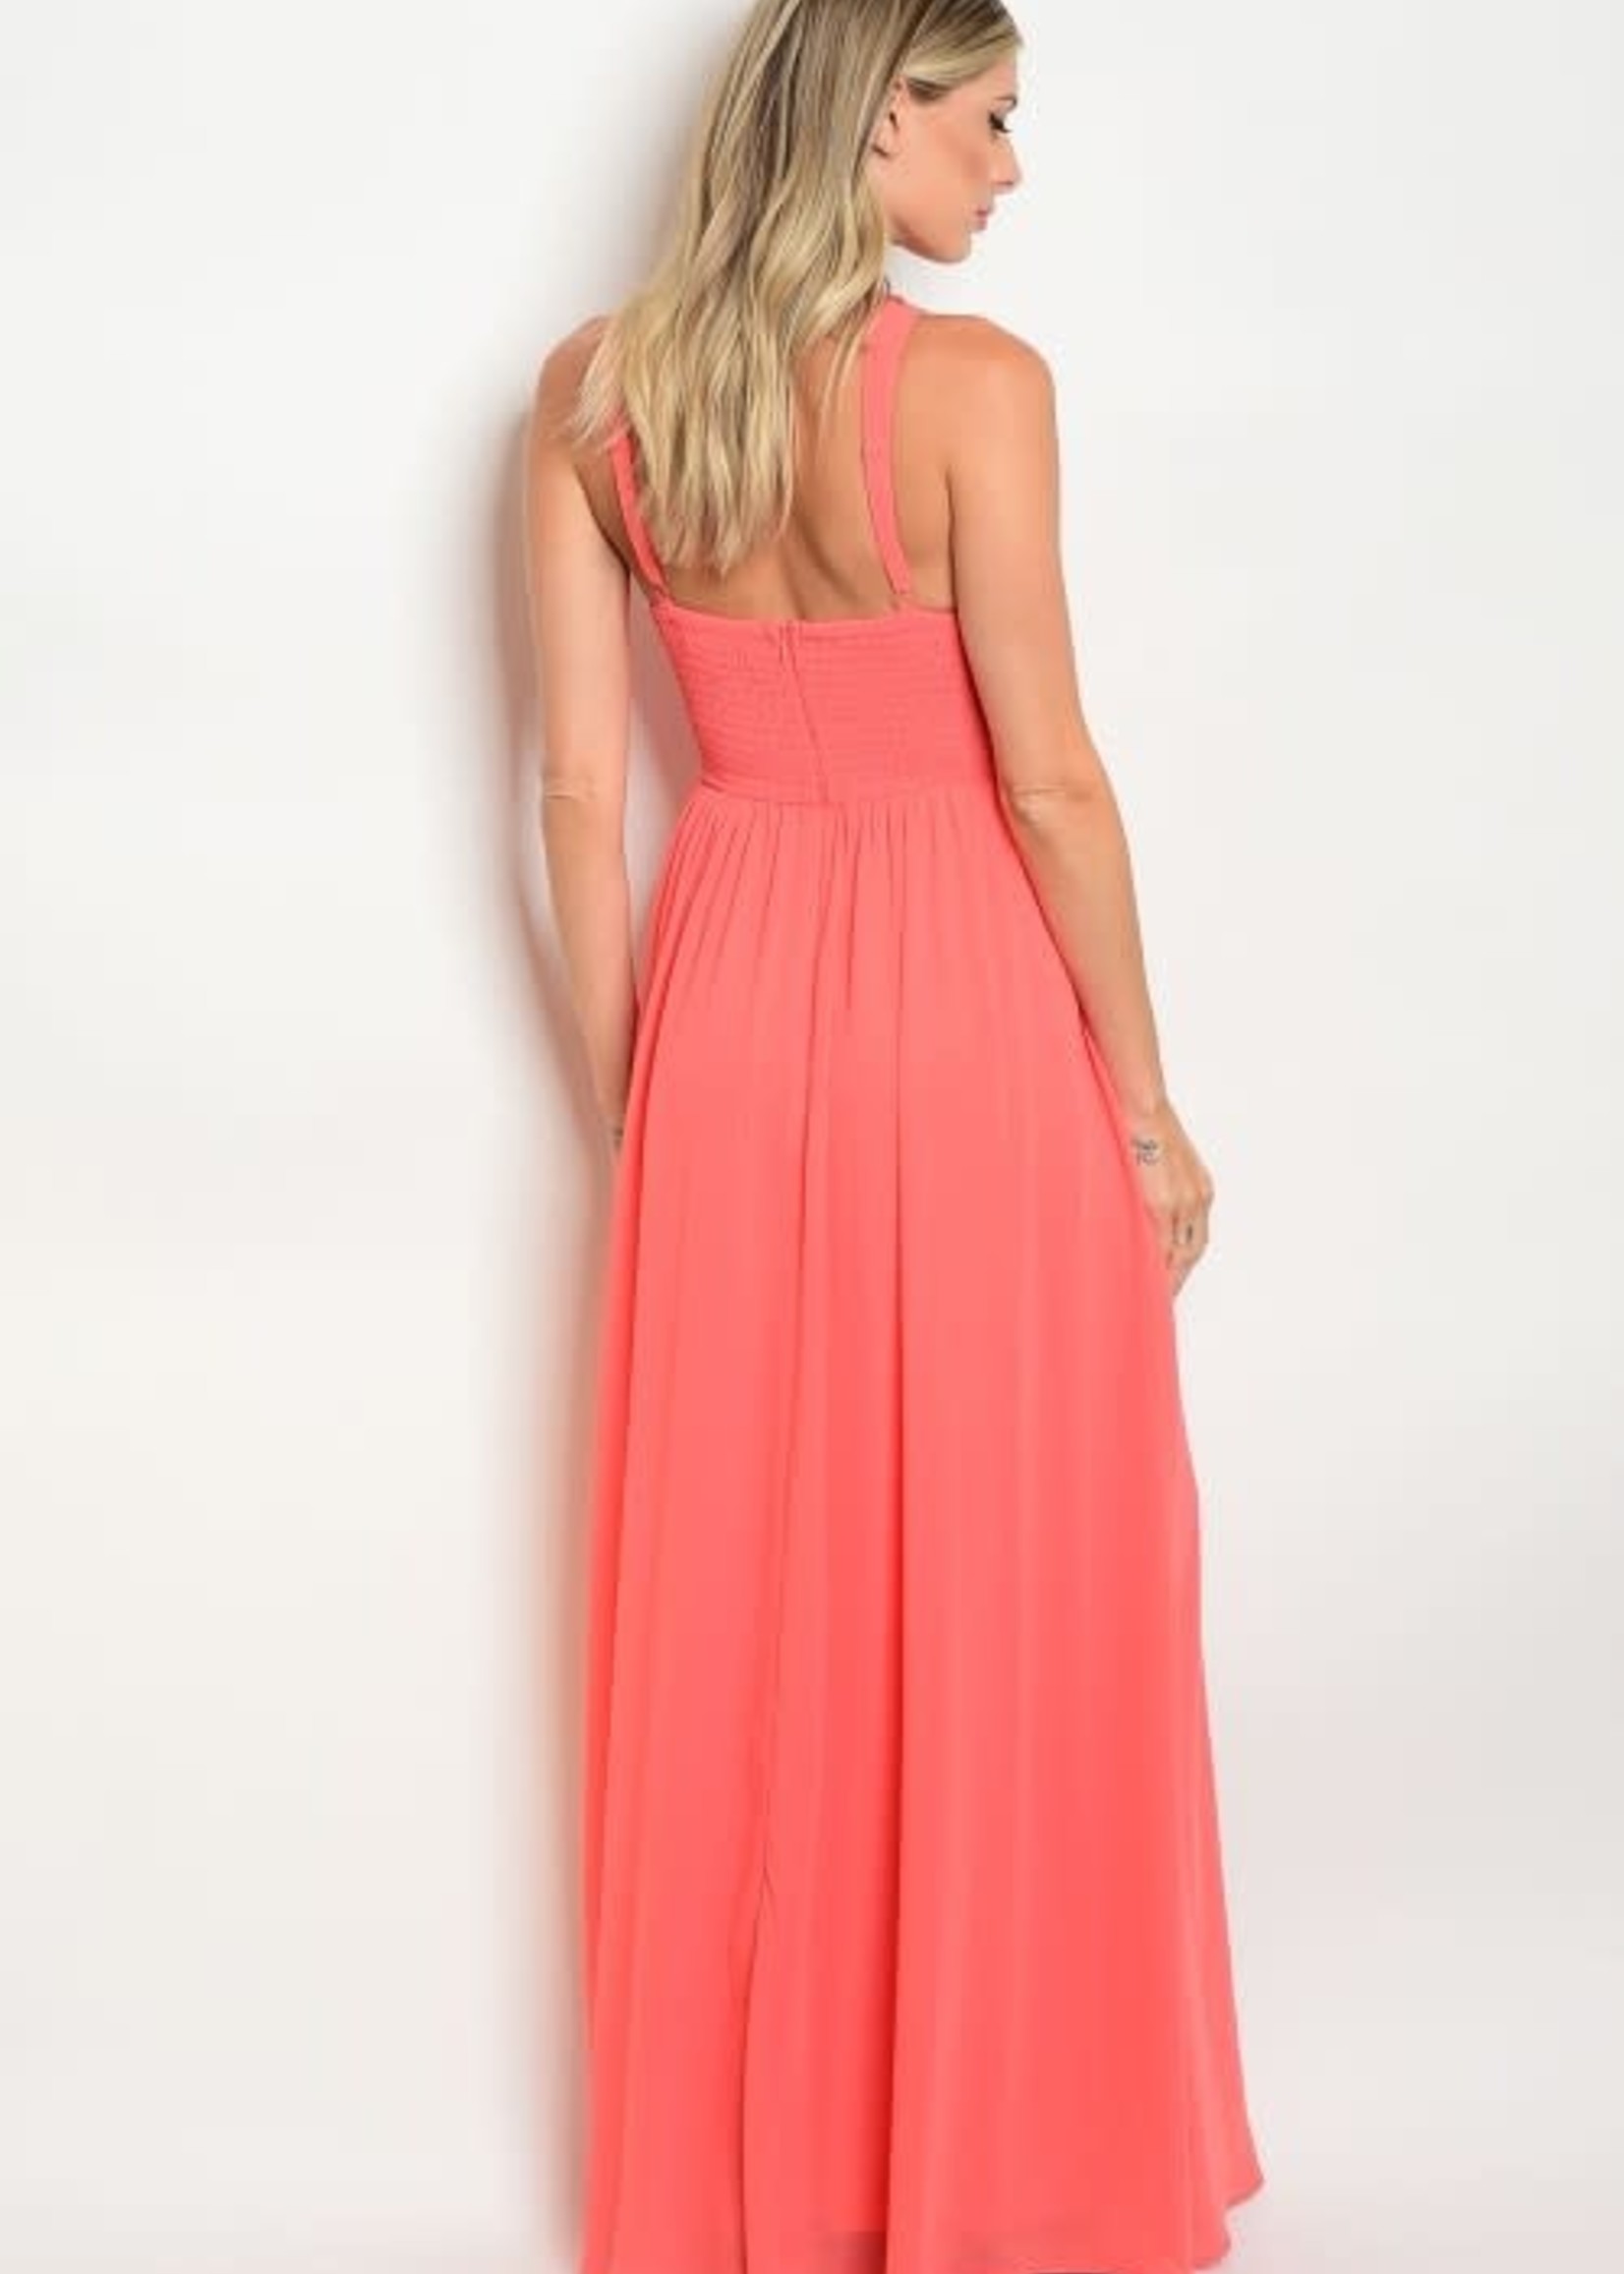 Coral Beaded Bodice Formal Dress